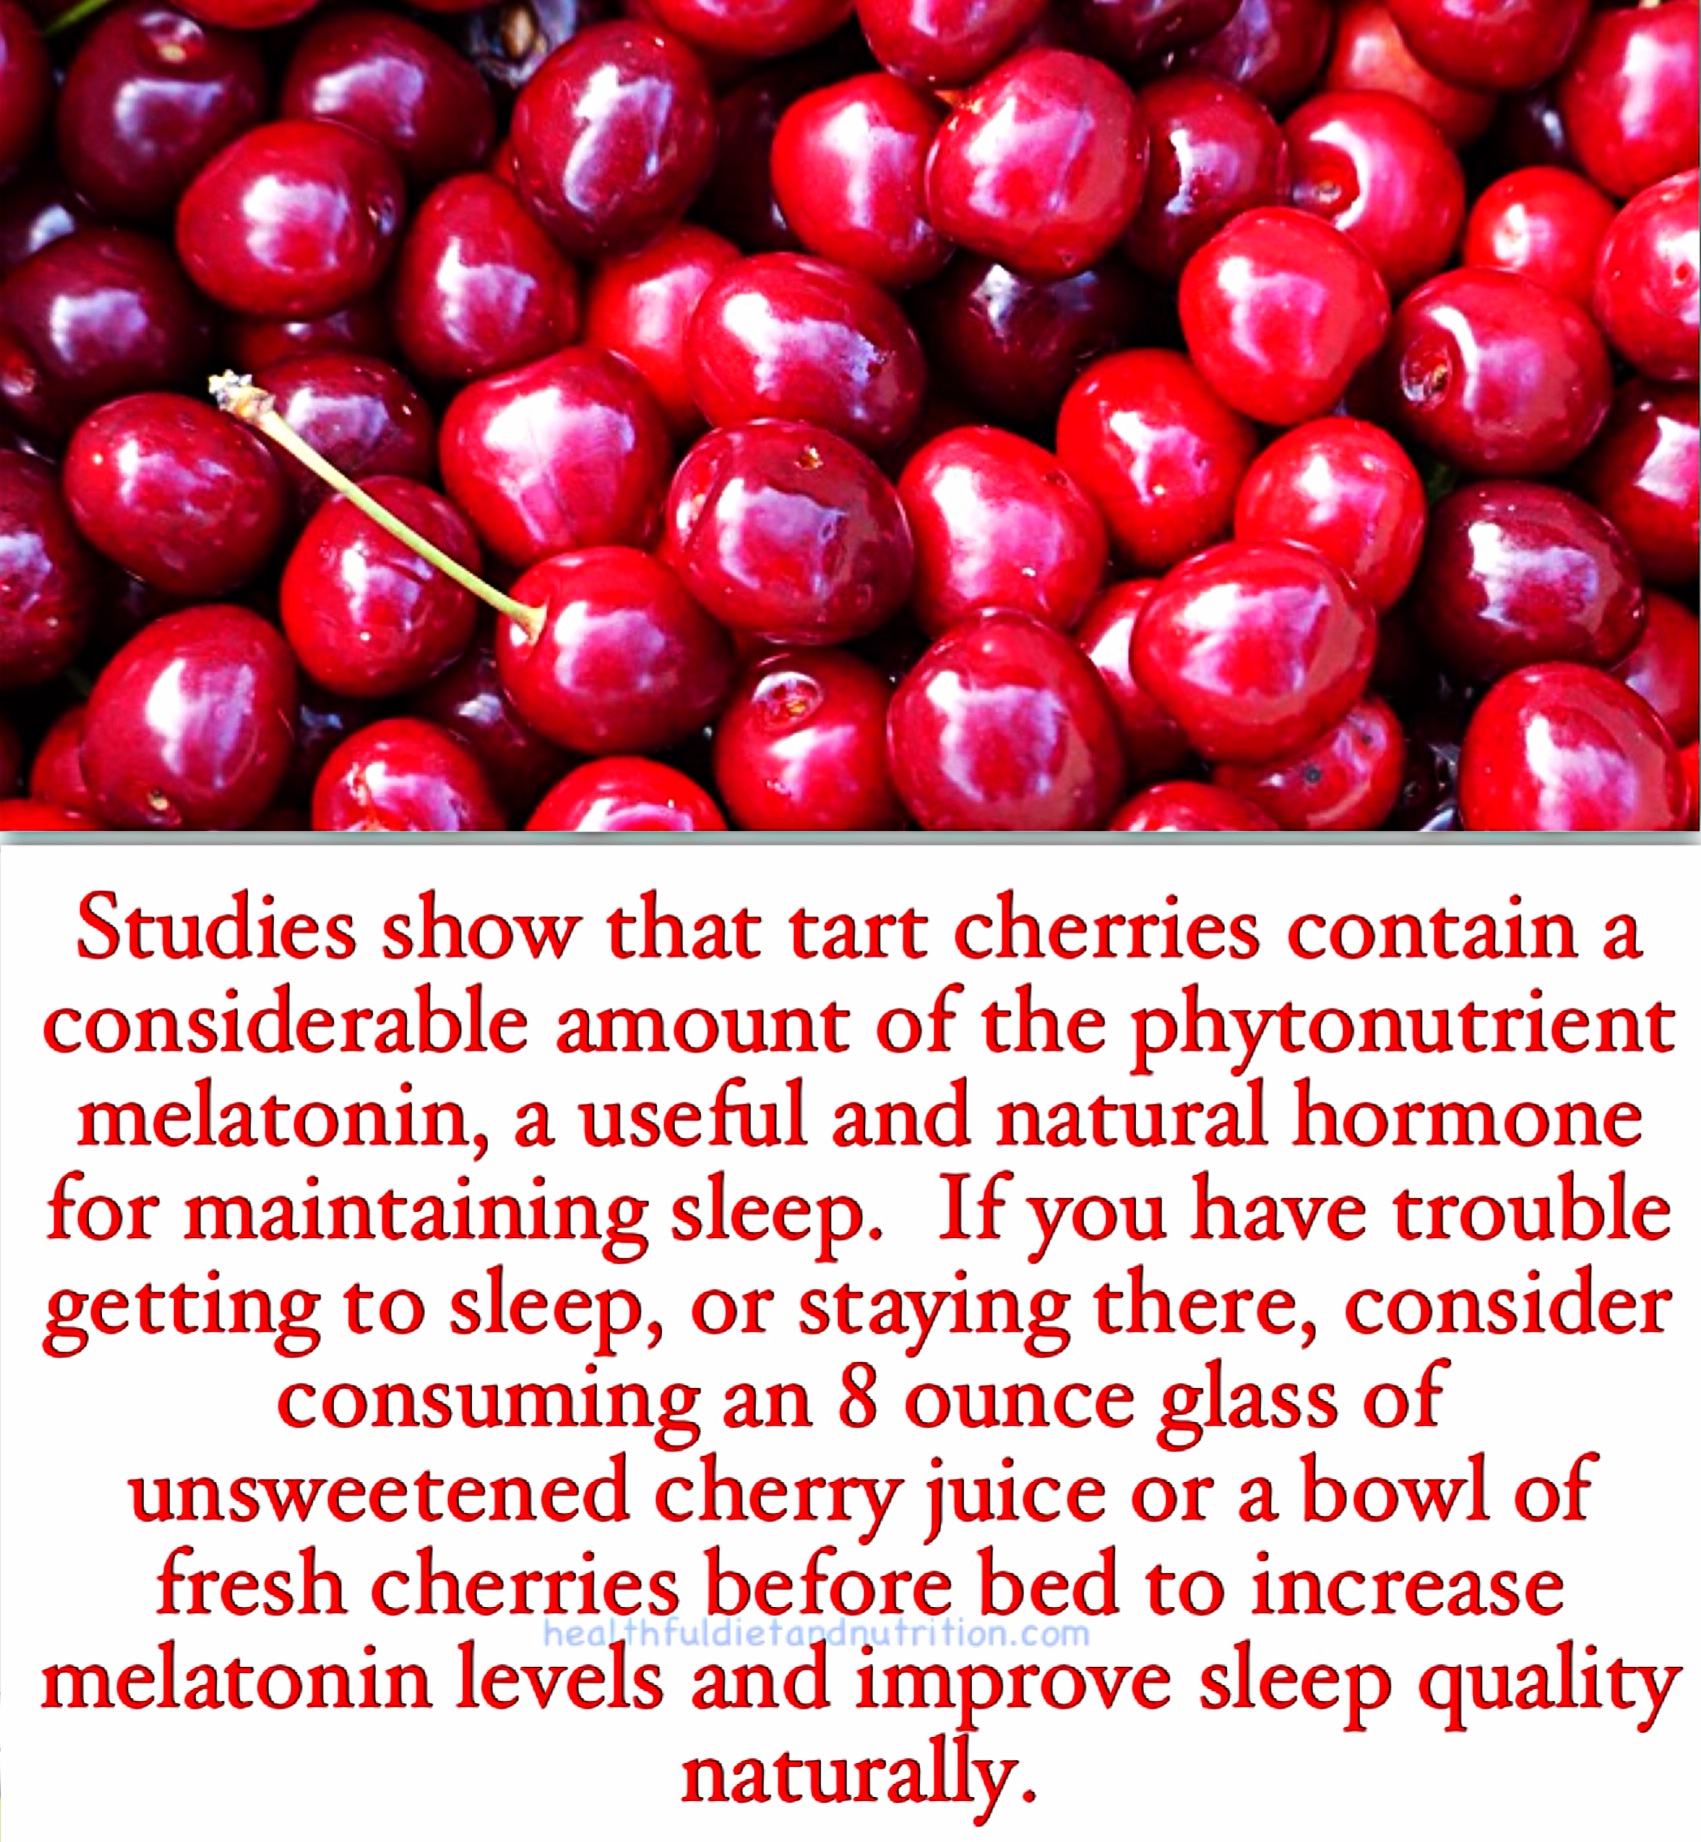 Studies show that tart cherries contain a considerable amount of the phytonutrient melatonin, a useful and natural hormone for maintaining sleep. If you have trouble getting to sleep, or staying there, consider consuming an 8 ounce glass of unsweetened cherry juice or a bowl of fresh cherries before bed to increase melatonin levels and improve sleep quality naturally.